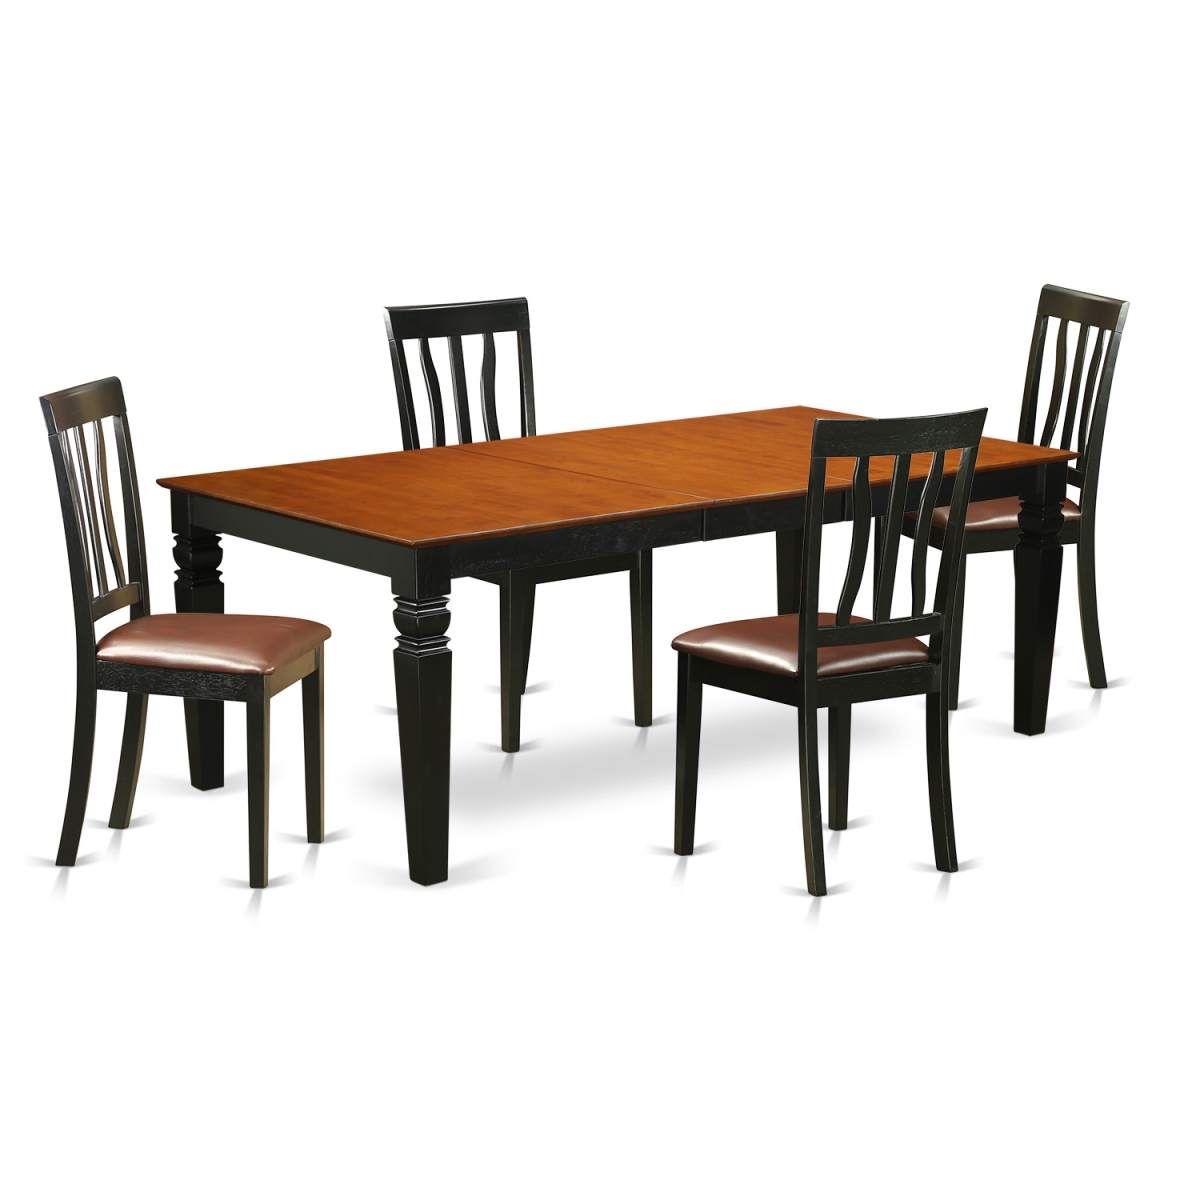 Lgan5-bch-lc Dinette Set With One Logan Table & 4 Chairs, Black & Cherry - 5 Piece